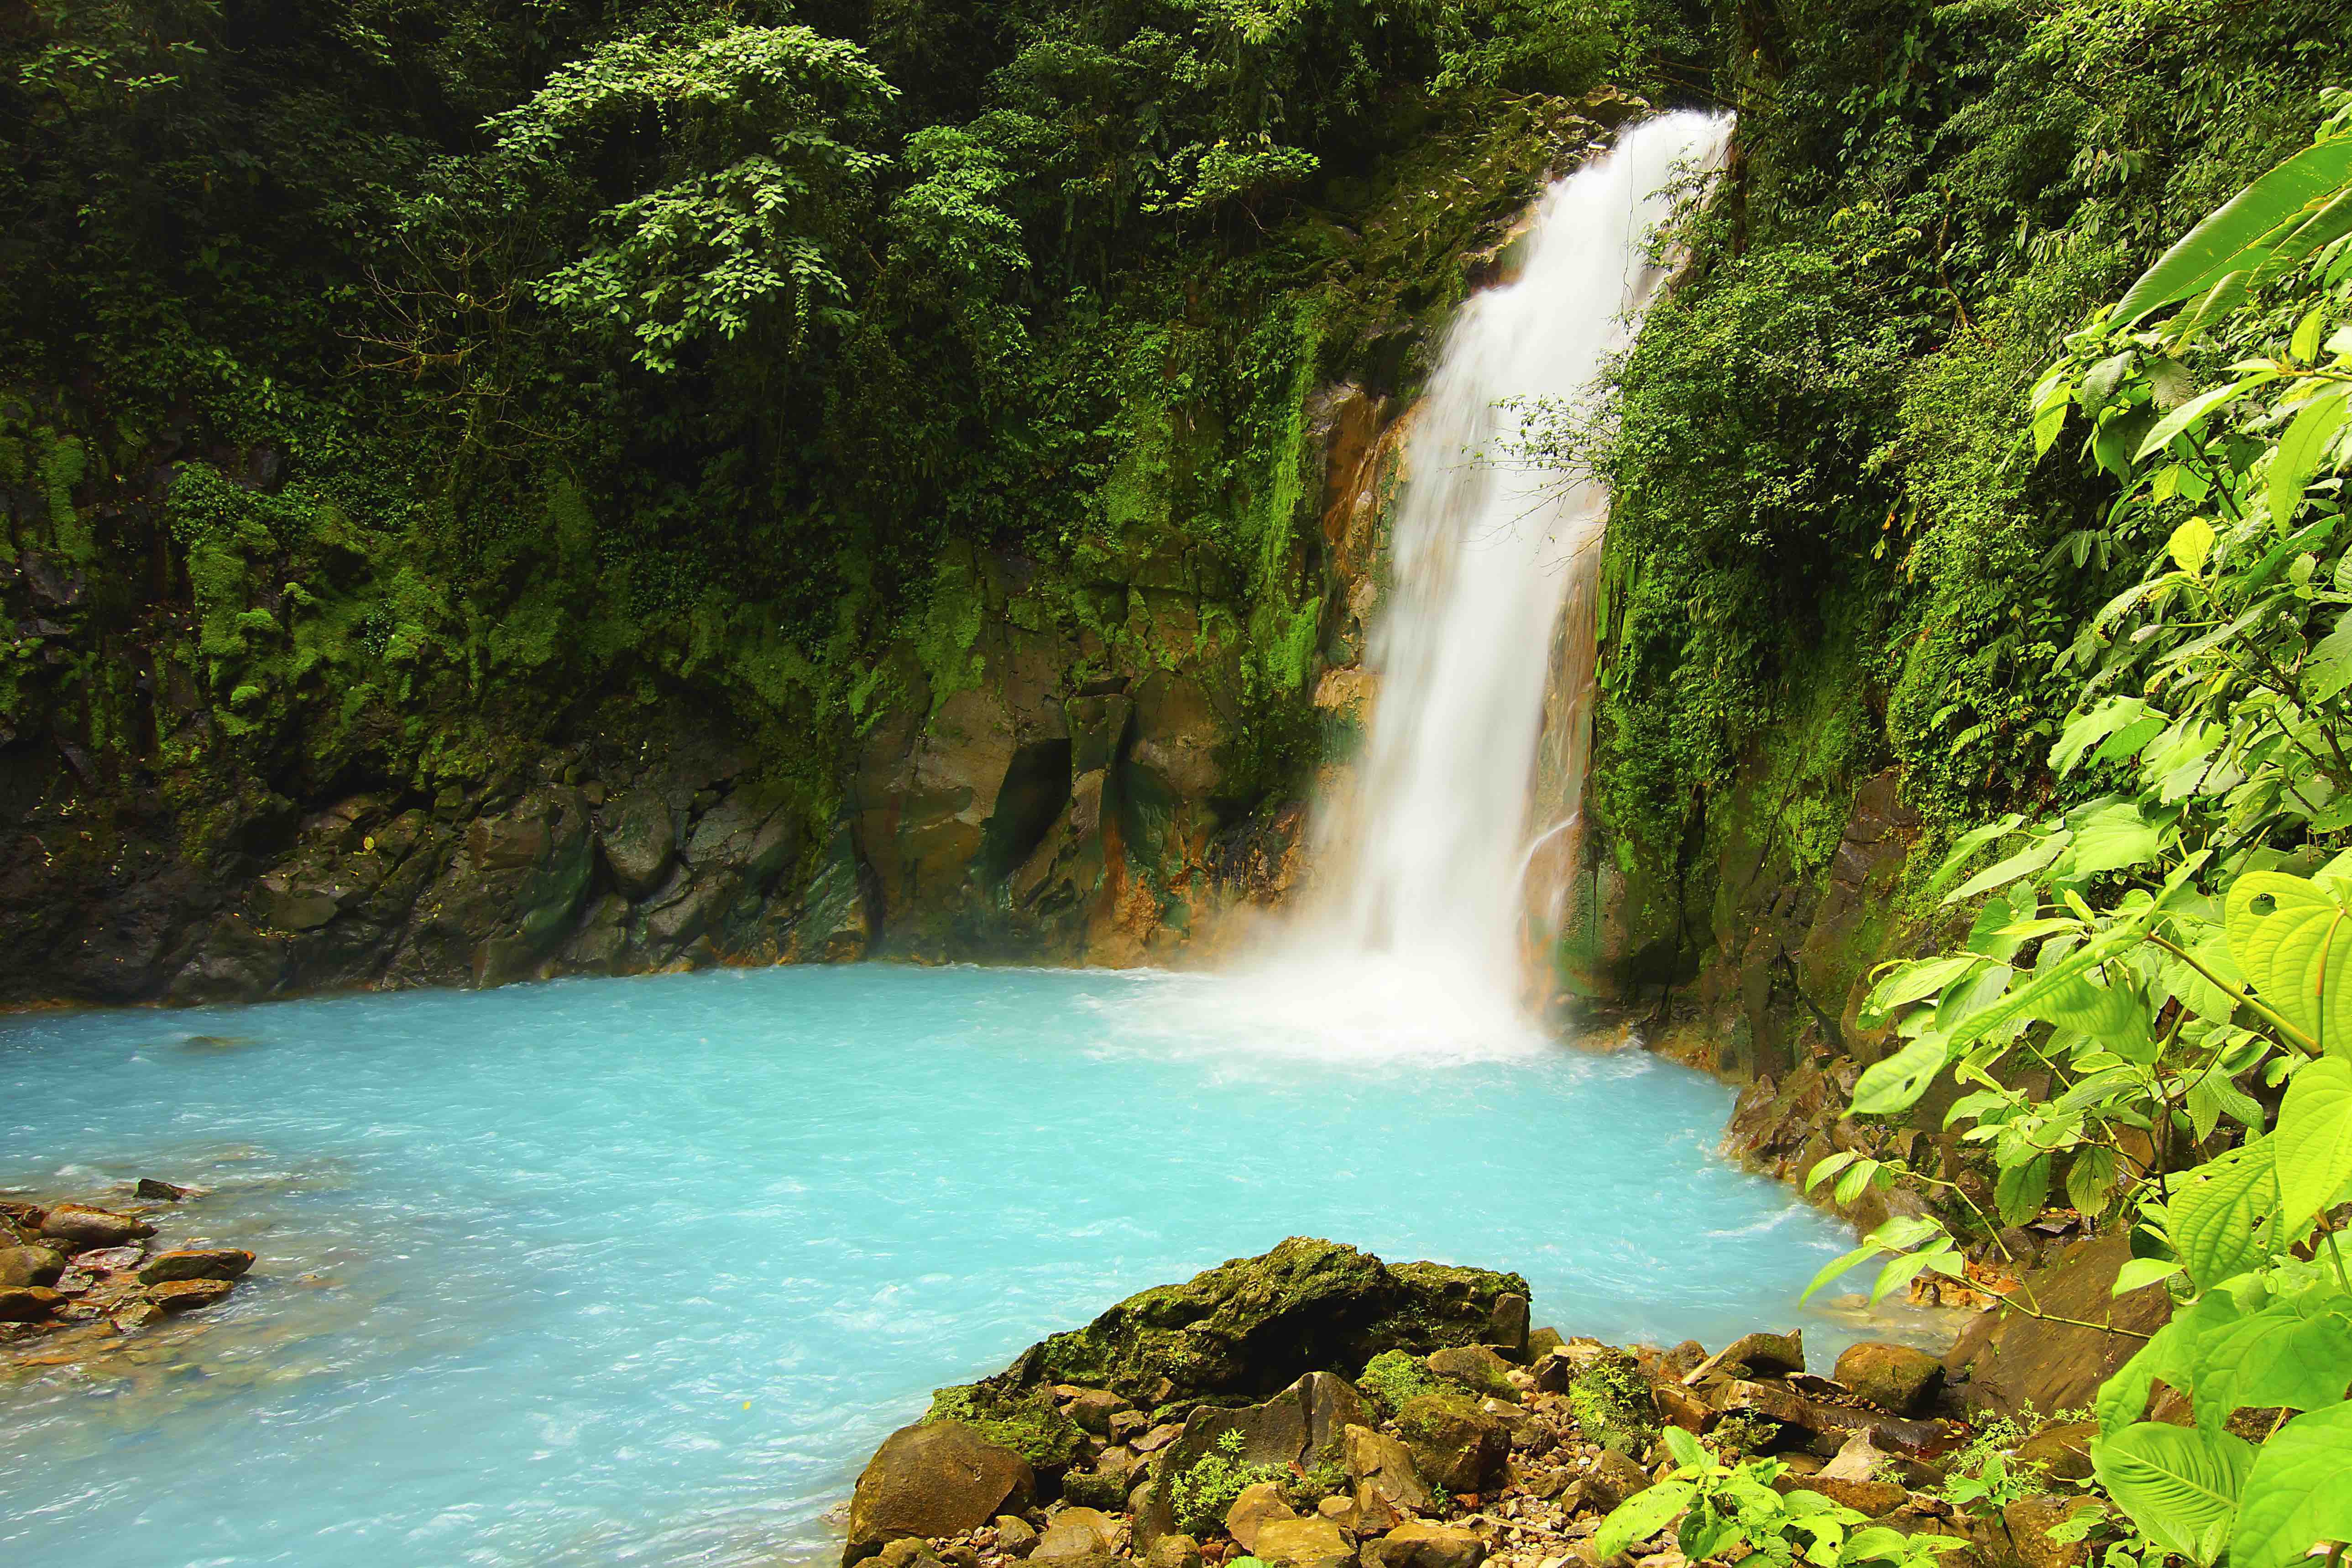 Dive into nature: 9 natural swimming pools around the world